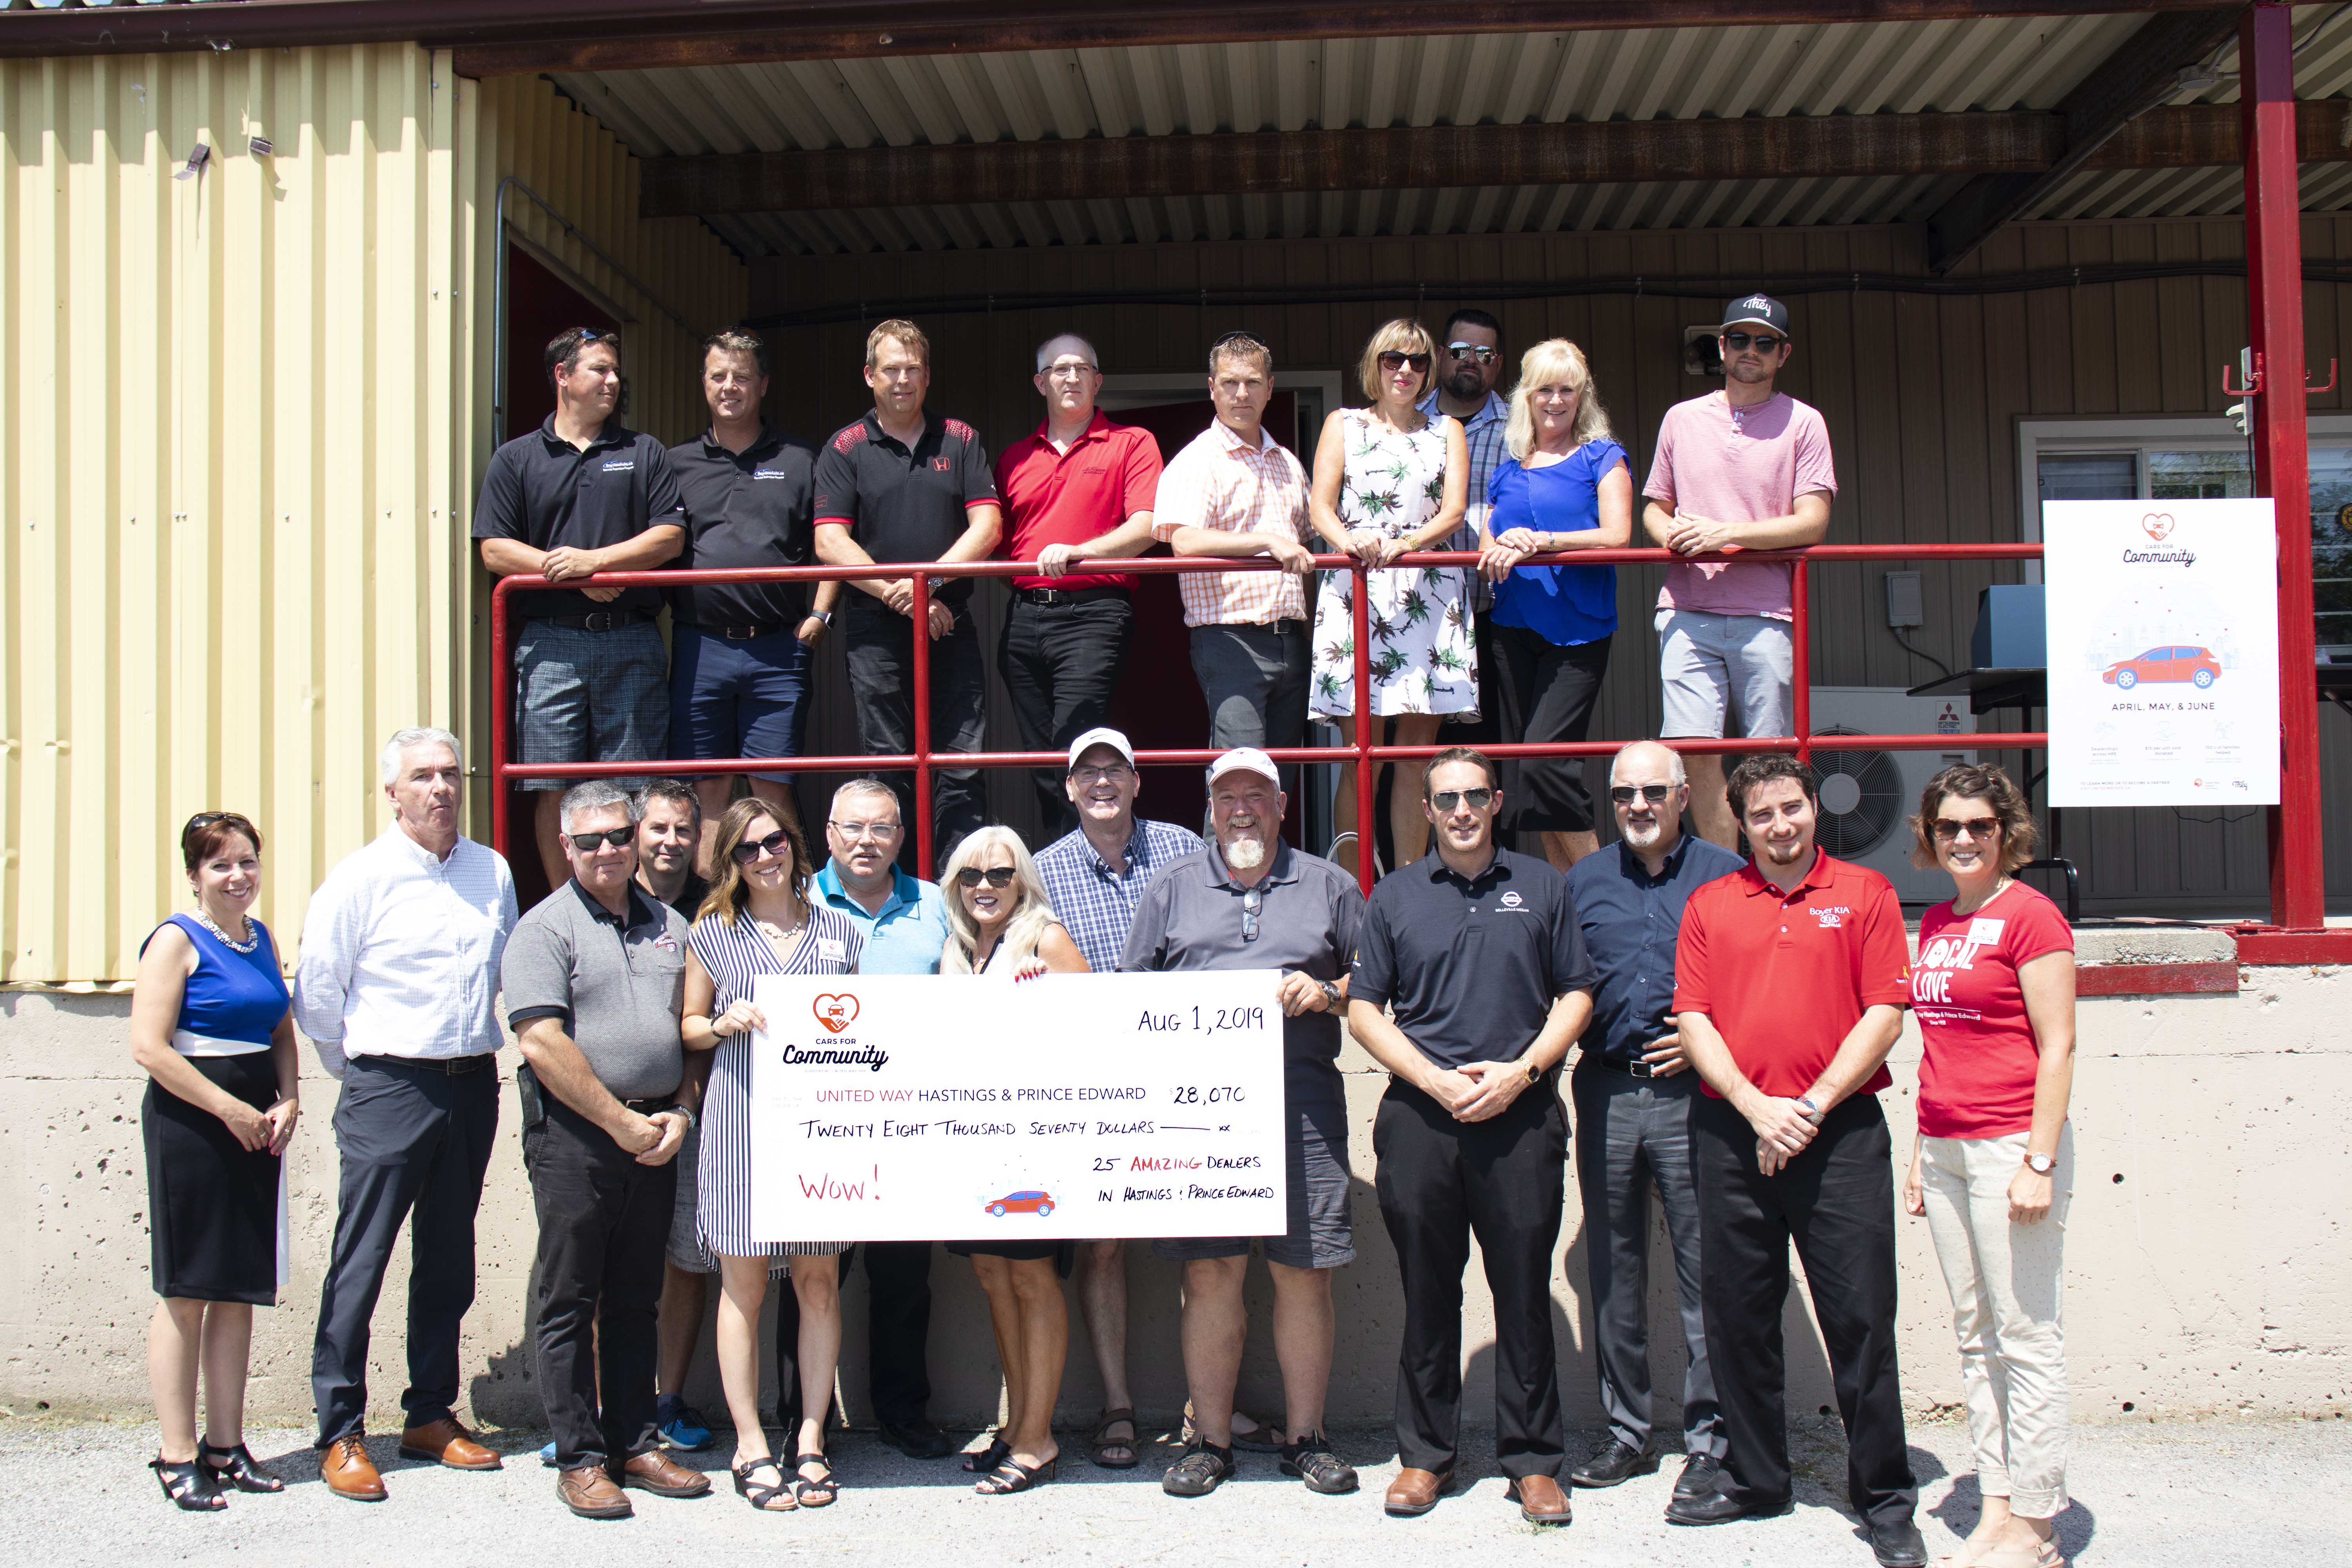 united way hastings prince edward cars for community